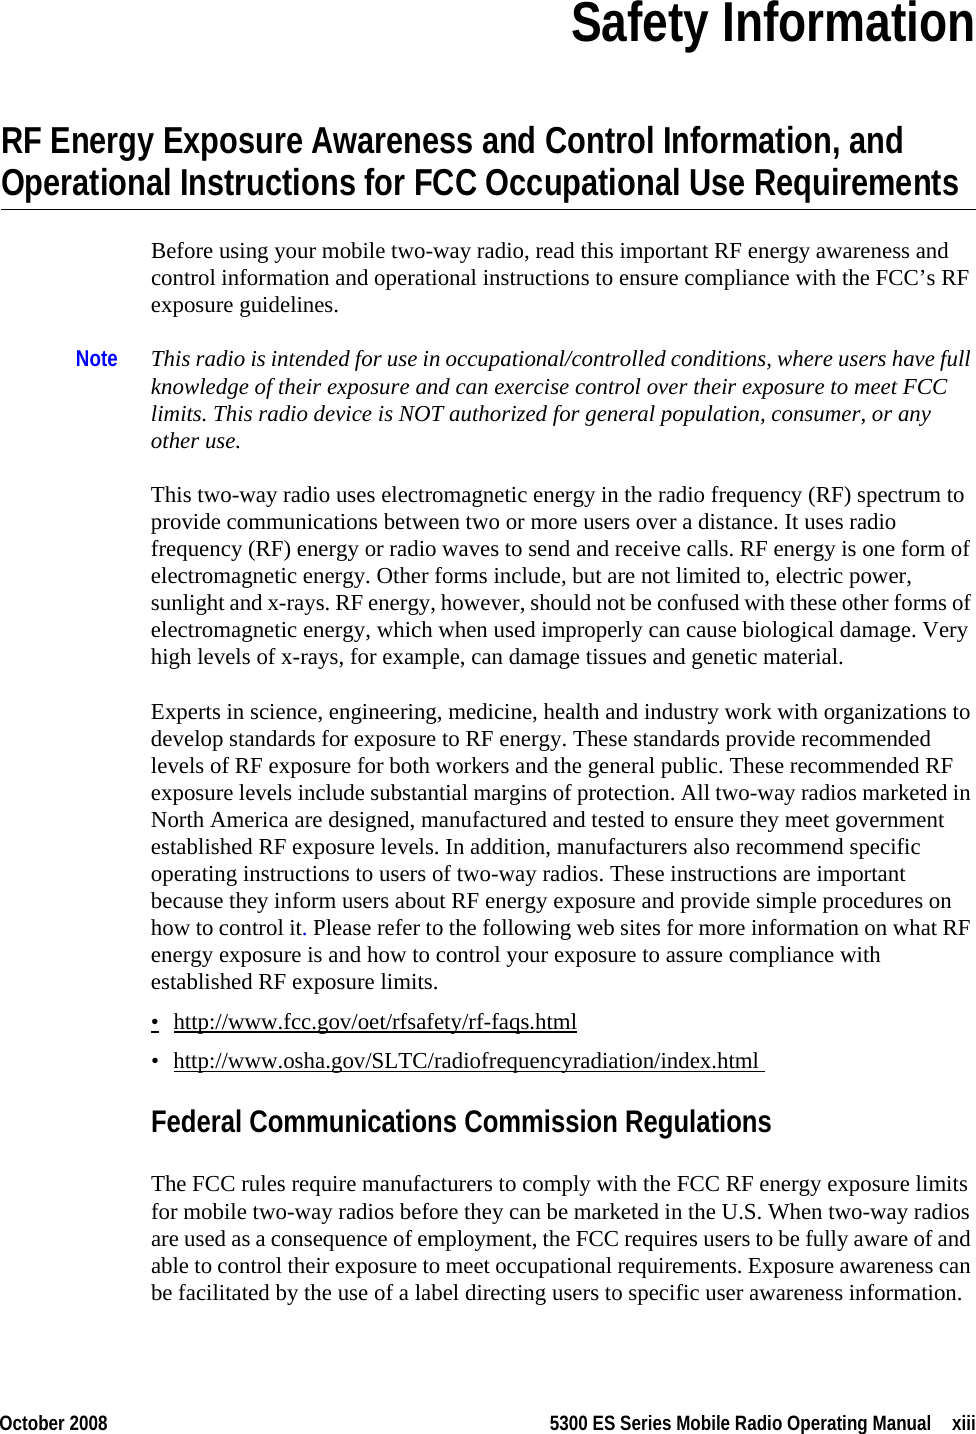 October 2008 5300 ES Series Mobile Radio Operating Manual xiiiSection0Safety InformationRF Energy Exposure Awareness and Control Information, and Operational Instructions for FCC Occupational Use RequirementsBefore using your mobile two-way radio, read this important RF energy awareness and control information and operational instructions to ensure compliance with the FCC’s RF exposure guidelines.Note This radio is intended for use in occupational/controlled conditions, where users have full knowledge of their exposure and can exercise control over their exposure to meet FCC limits. This radio device is NOT authorized for general population, consumer, or any other use. This two-way radio uses electromagnetic energy in the radio frequency (RF) spectrum to provide communications between two or more users over a distance. It uses radio frequency (RF) energy or radio waves to send and receive calls. RF energy is one form of electromagnetic energy. Other forms include, but are not limited to, electric power, sunlight and x-rays. RF energy, however, should not be confused with these other forms of electromagnetic energy, which when used improperly can cause biological damage. Very high levels of x-rays, for example, can damage tissues and genetic material. Experts in science, engineering, medicine, health and industry work with organizations to develop standards for exposure to RF energy. These standards provide recommended levels of RF exposure for both workers and the general public. These recommended RF exposure levels include substantial margins of protection. All two-way radios marketed in North America are designed, manufactured and tested to ensure they meet government established RF exposure levels. In addition, manufacturers also recommend specific operating instructions to users of two-way radios. These instructions are important because they inform users about RF energy exposure and provide simple procedures on how to control it. Please refer to the following web sites for more information on what RF energy exposure is and how to control your exposure to assure compliance with established RF exposure limits.•http://www.fcc.gov/oet/rfsafety/rf-faqs.html• http://www.osha.gov/SLTC/radiofrequencyradiation/index.html Federal Communications Commission RegulationsThe FCC rules require manufacturers to comply with the FCC RF energy exposure limits for mobile two-way radios before they can be marketed in the U.S. When two-way radios are used as a consequence of employment, the FCC requires users to be fully aware of and able to control their exposure to meet occupational requirements. Exposure awareness can be facilitated by the use of a label directing users to specific user awareness information. 